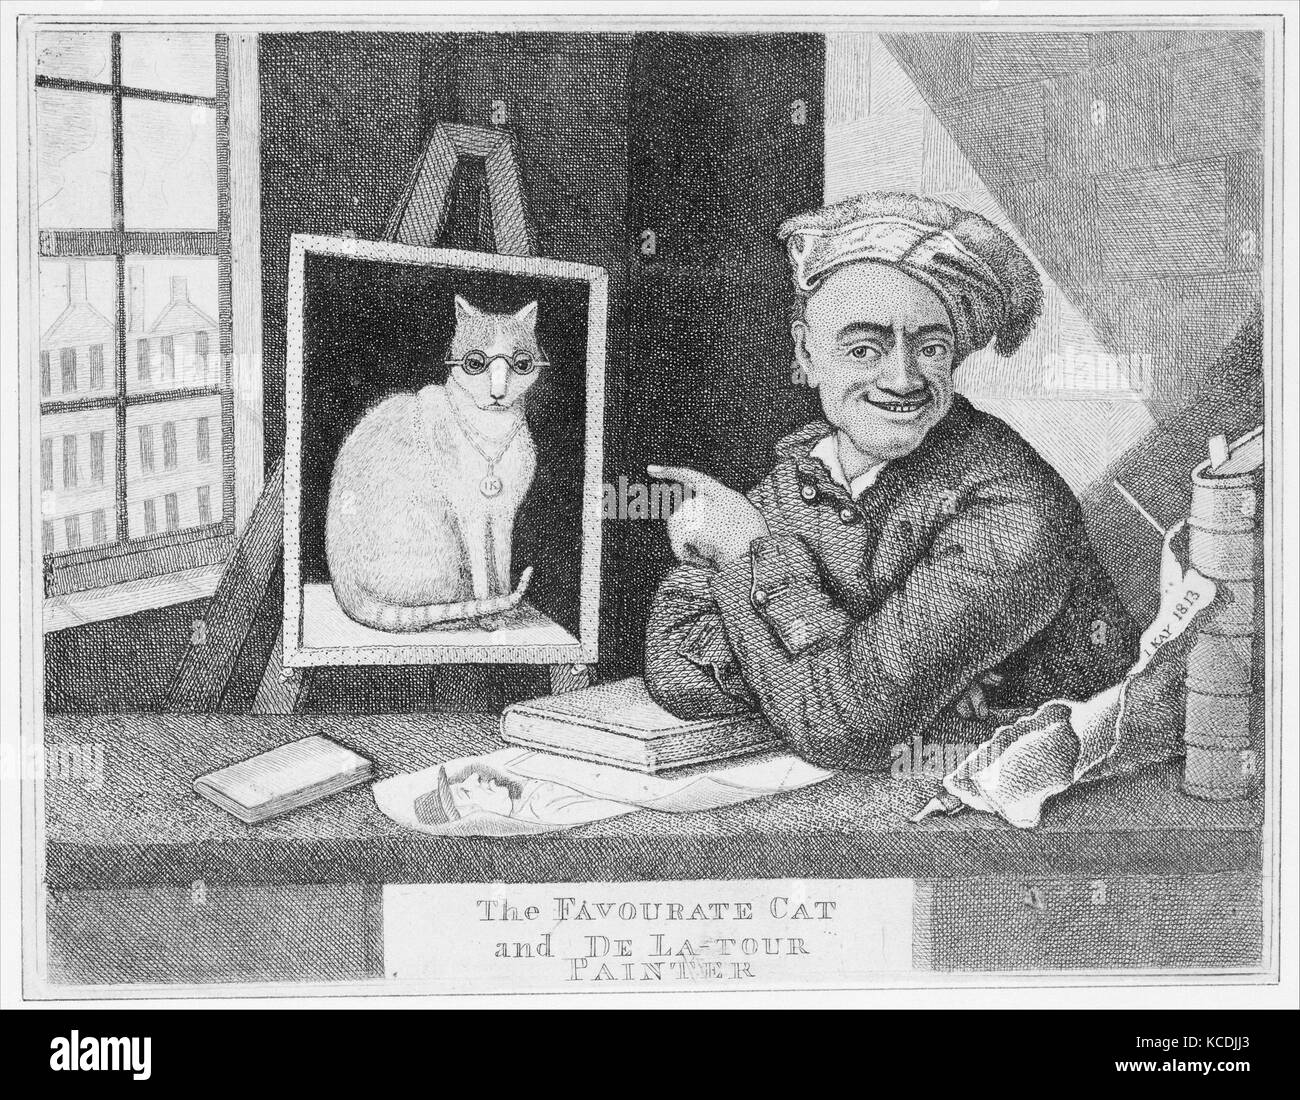 The Favourite Cat and De La-Tour Painter, Drawn and etched by John Kay, 1813 Stock Photo